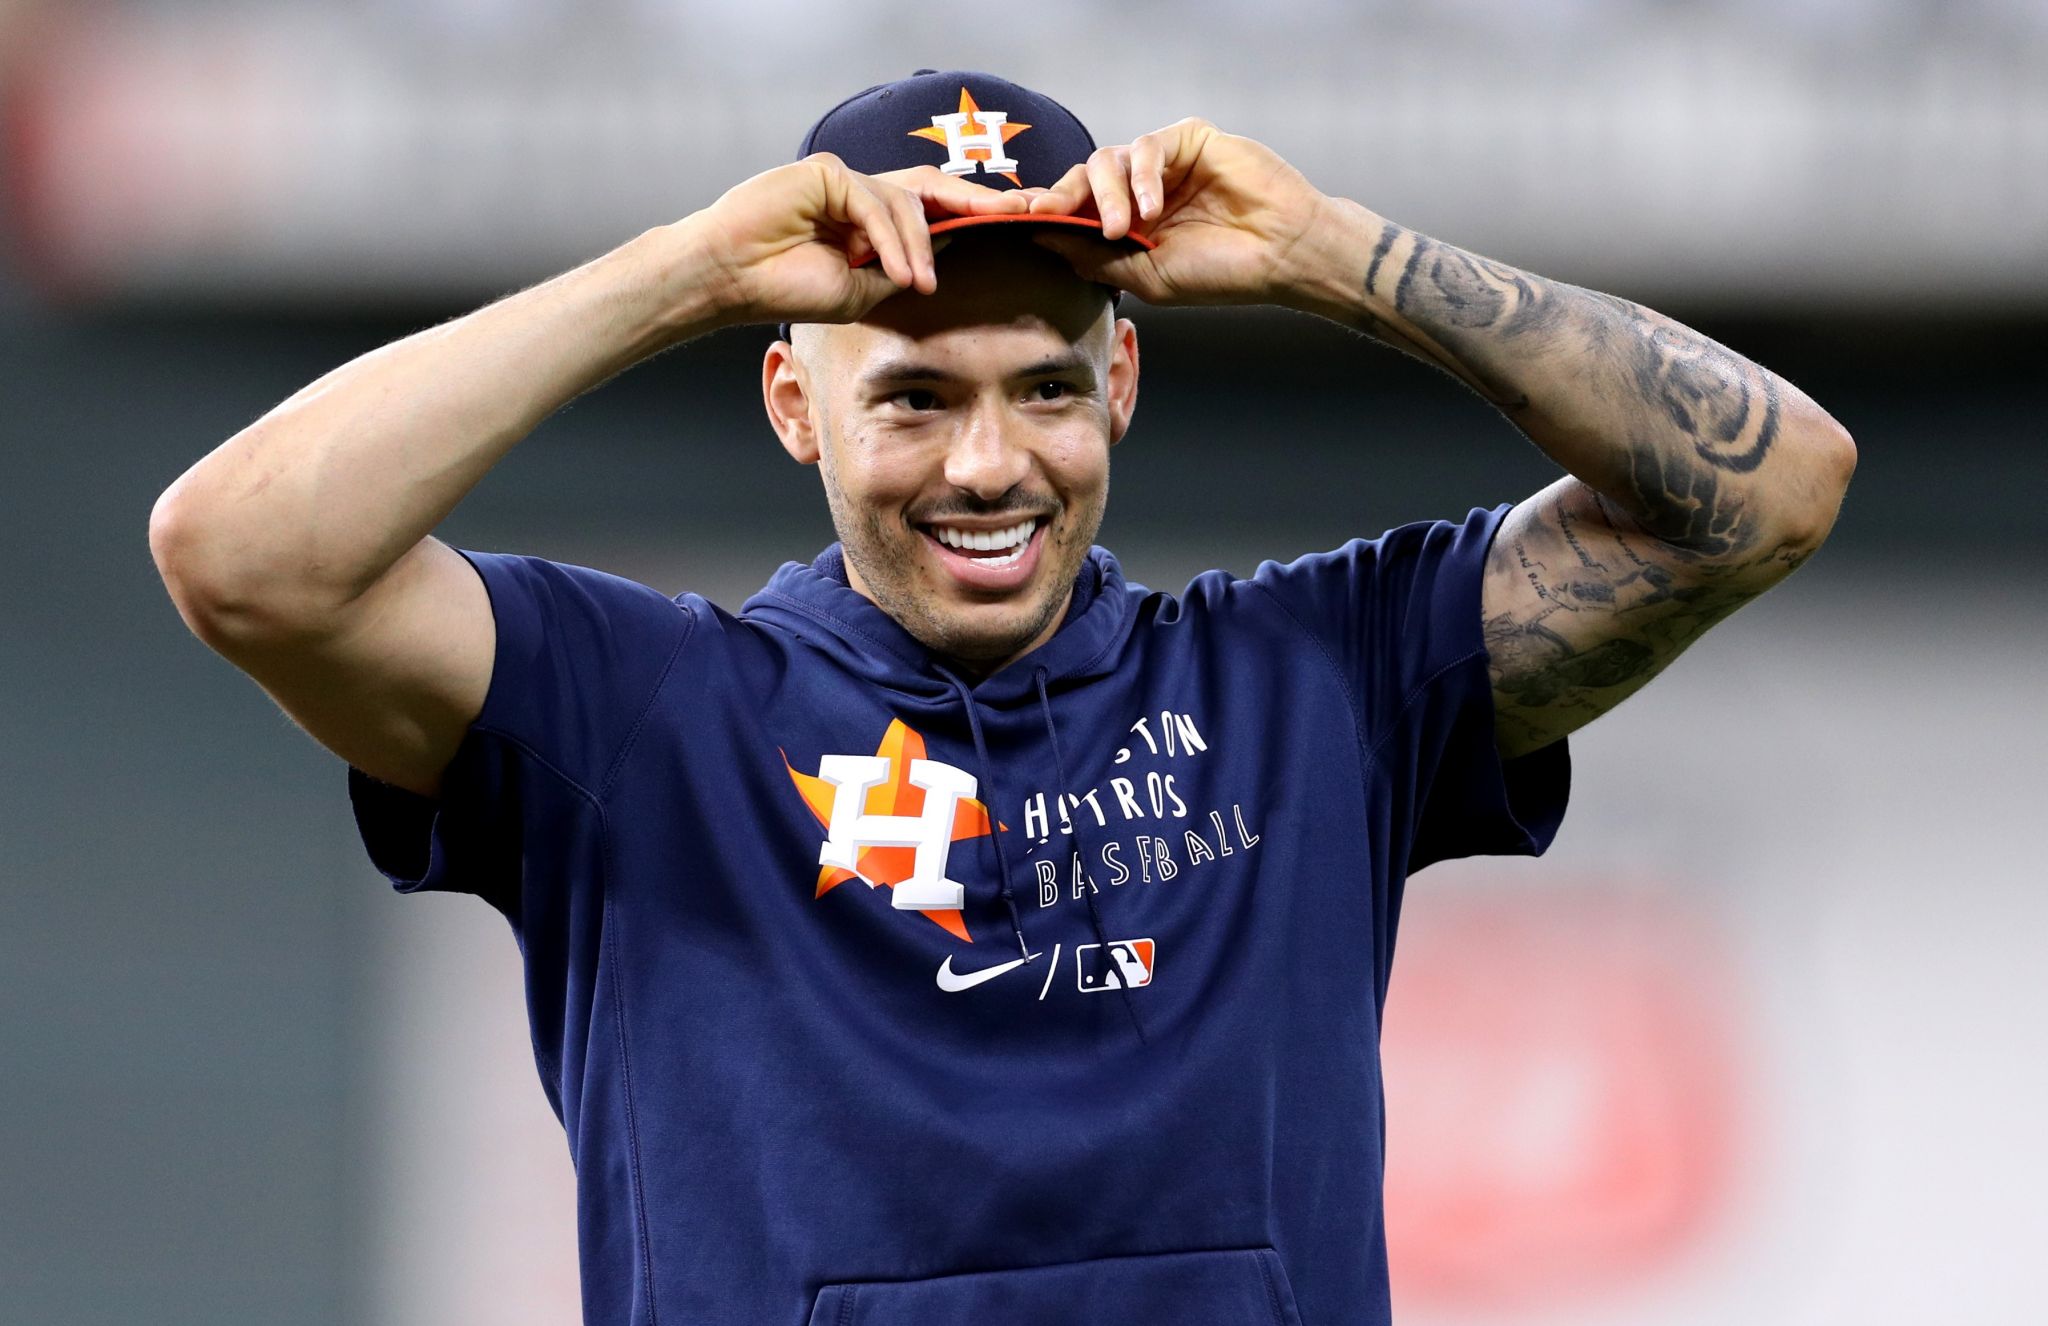 Cheating scandal won't stop Astros fans from getting team tattoos